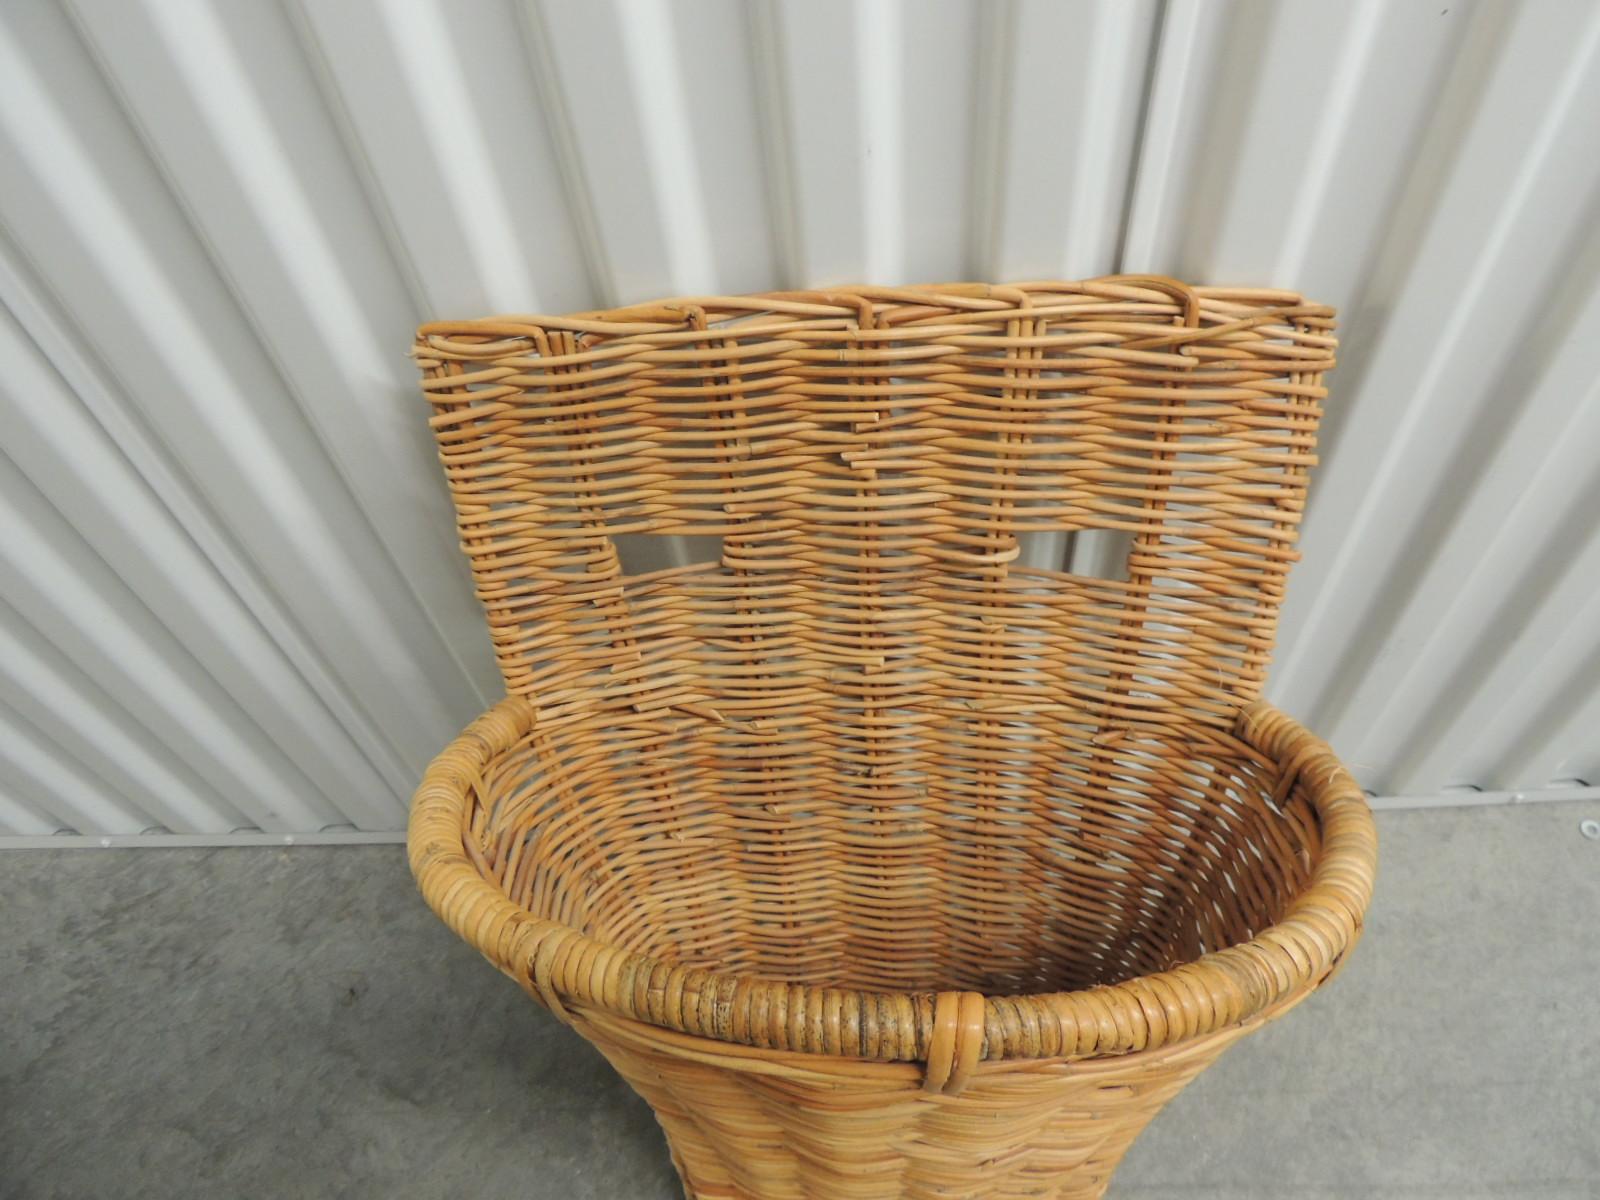 Vintage wicker and bamboo woven wall basket or umbrella stand.
Oval conical shape wall basket with openings woven in the back to hang on the wall.
Size: 16 x 12 x 24 H.